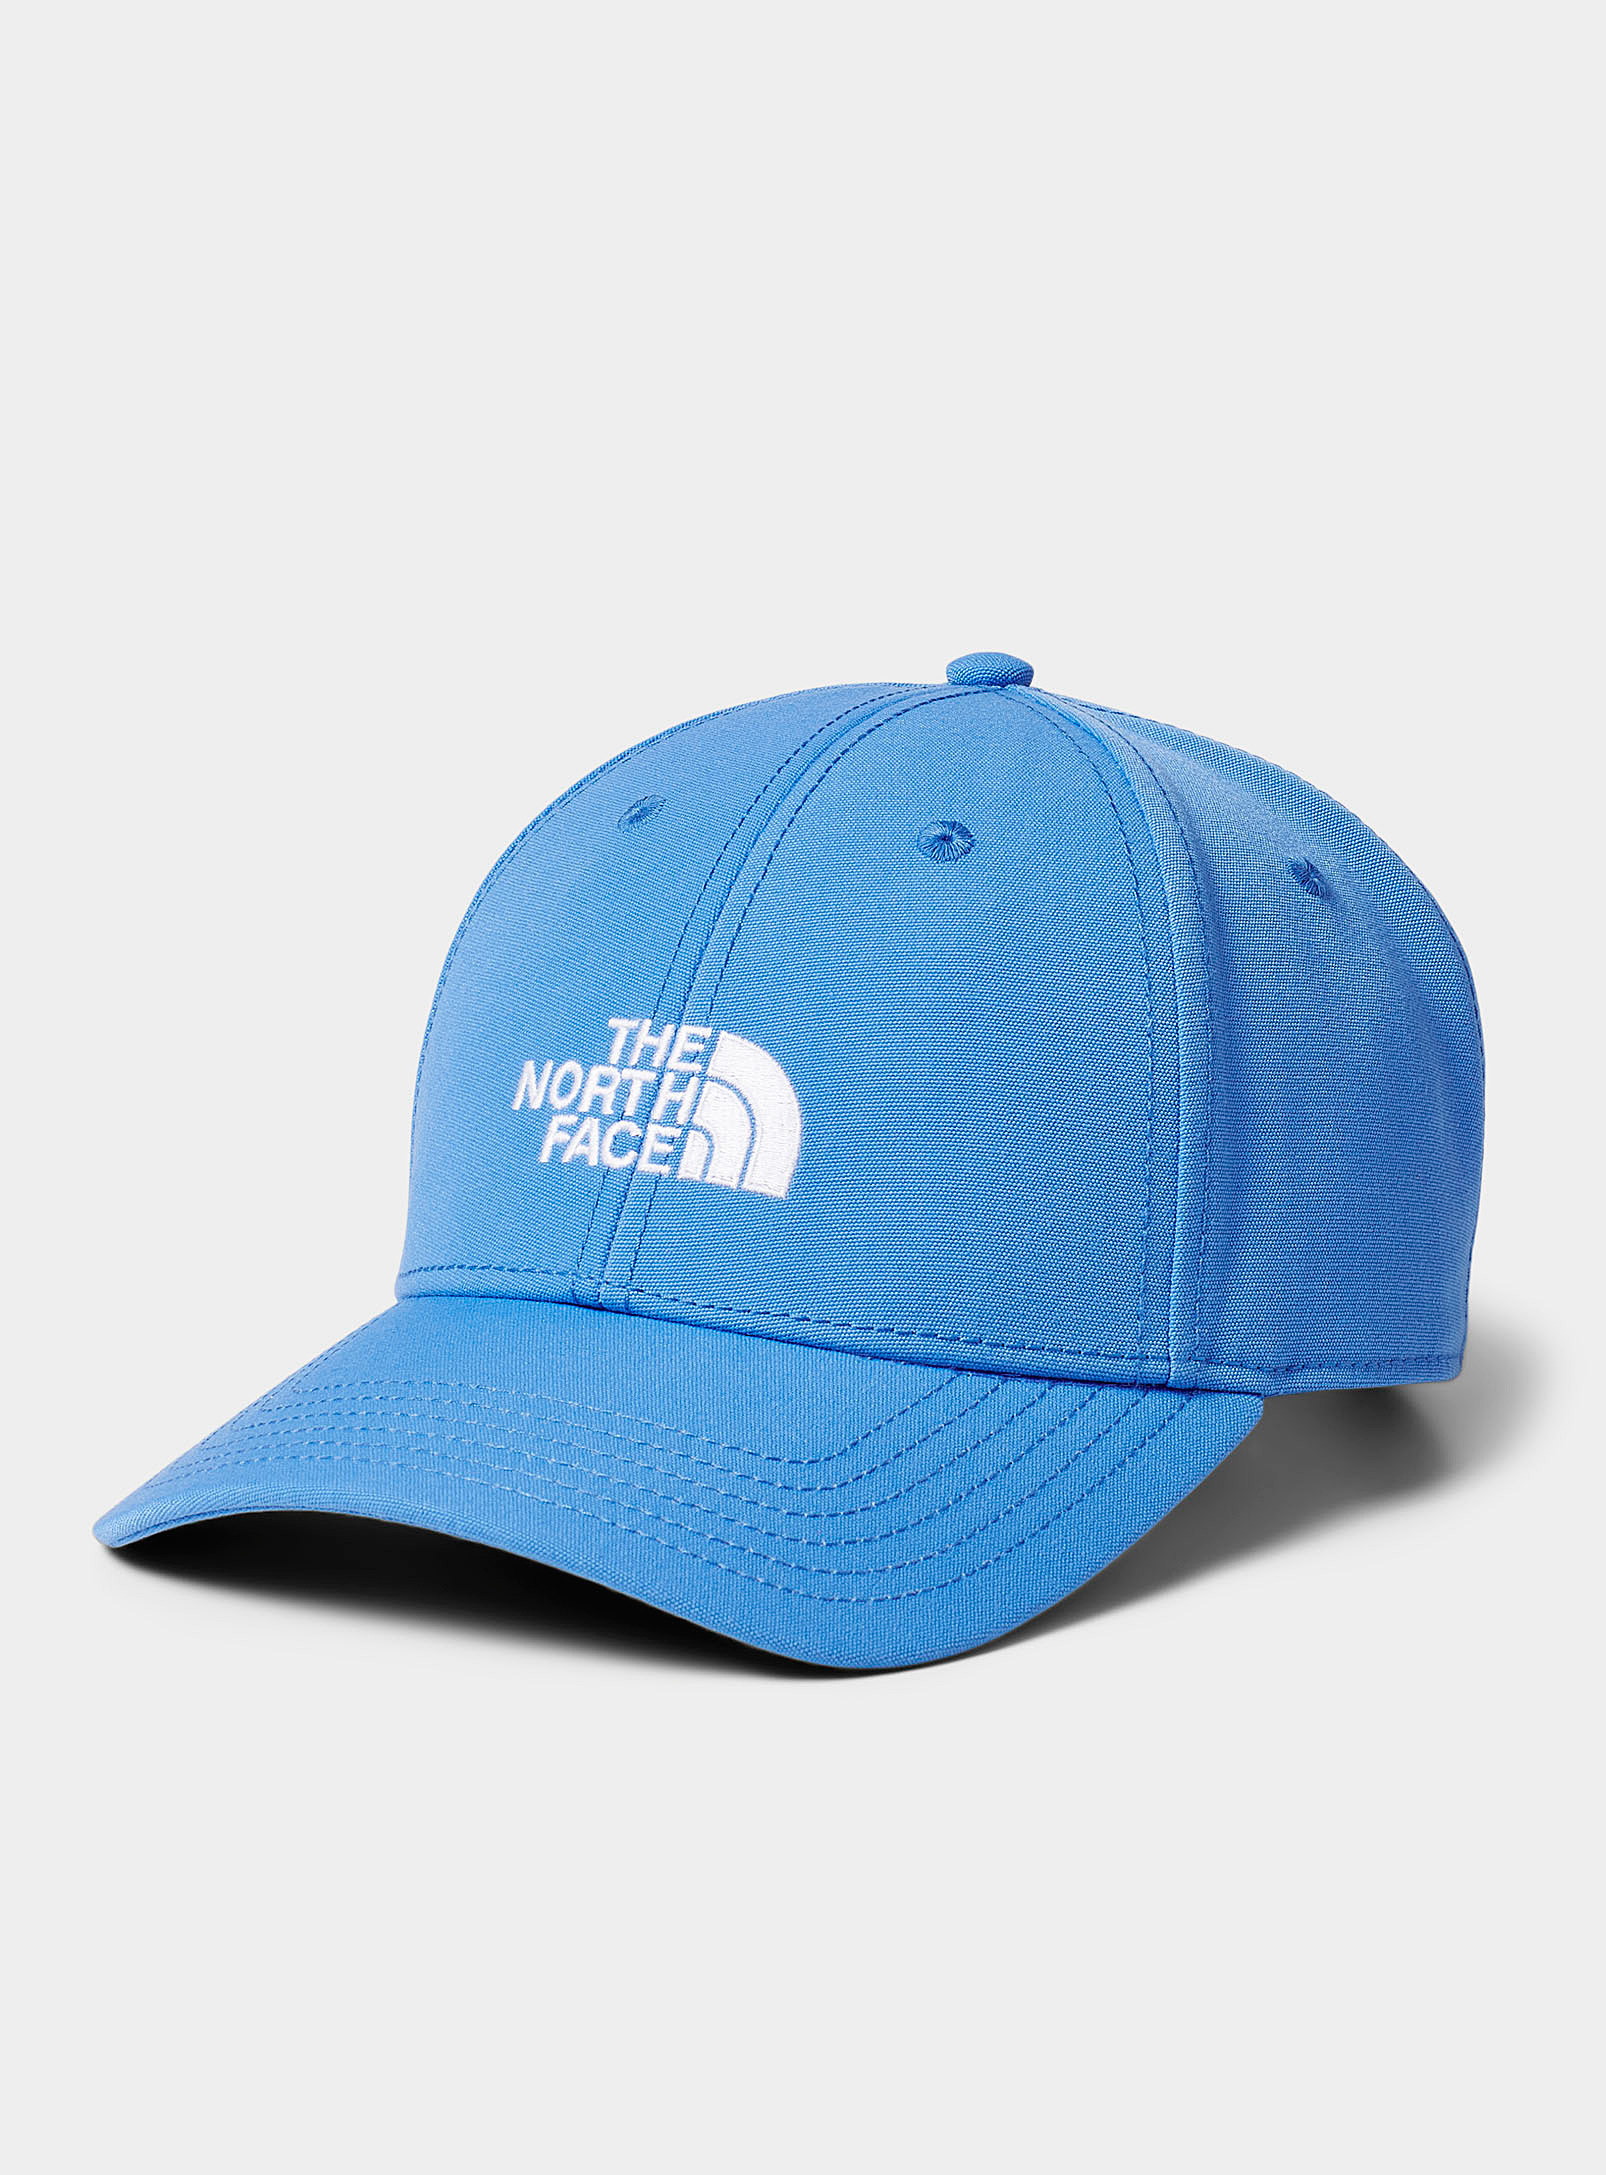 THE NORTH FACE RECYCLED '66 CLASSIC CAP